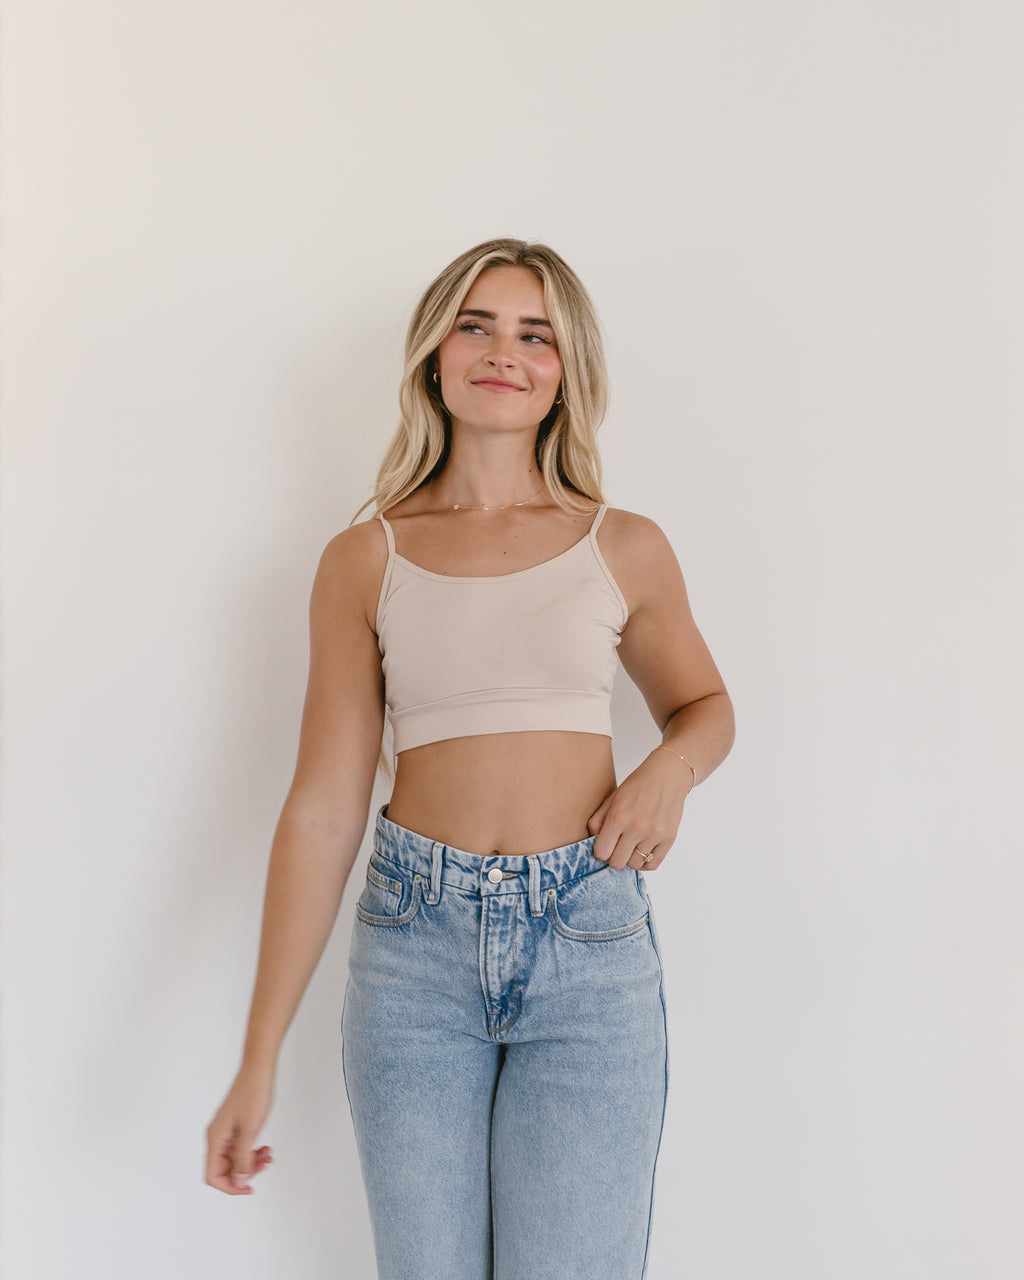 Woman in jeans and black crop top, wearing white Spaghetti Strap Halftee.